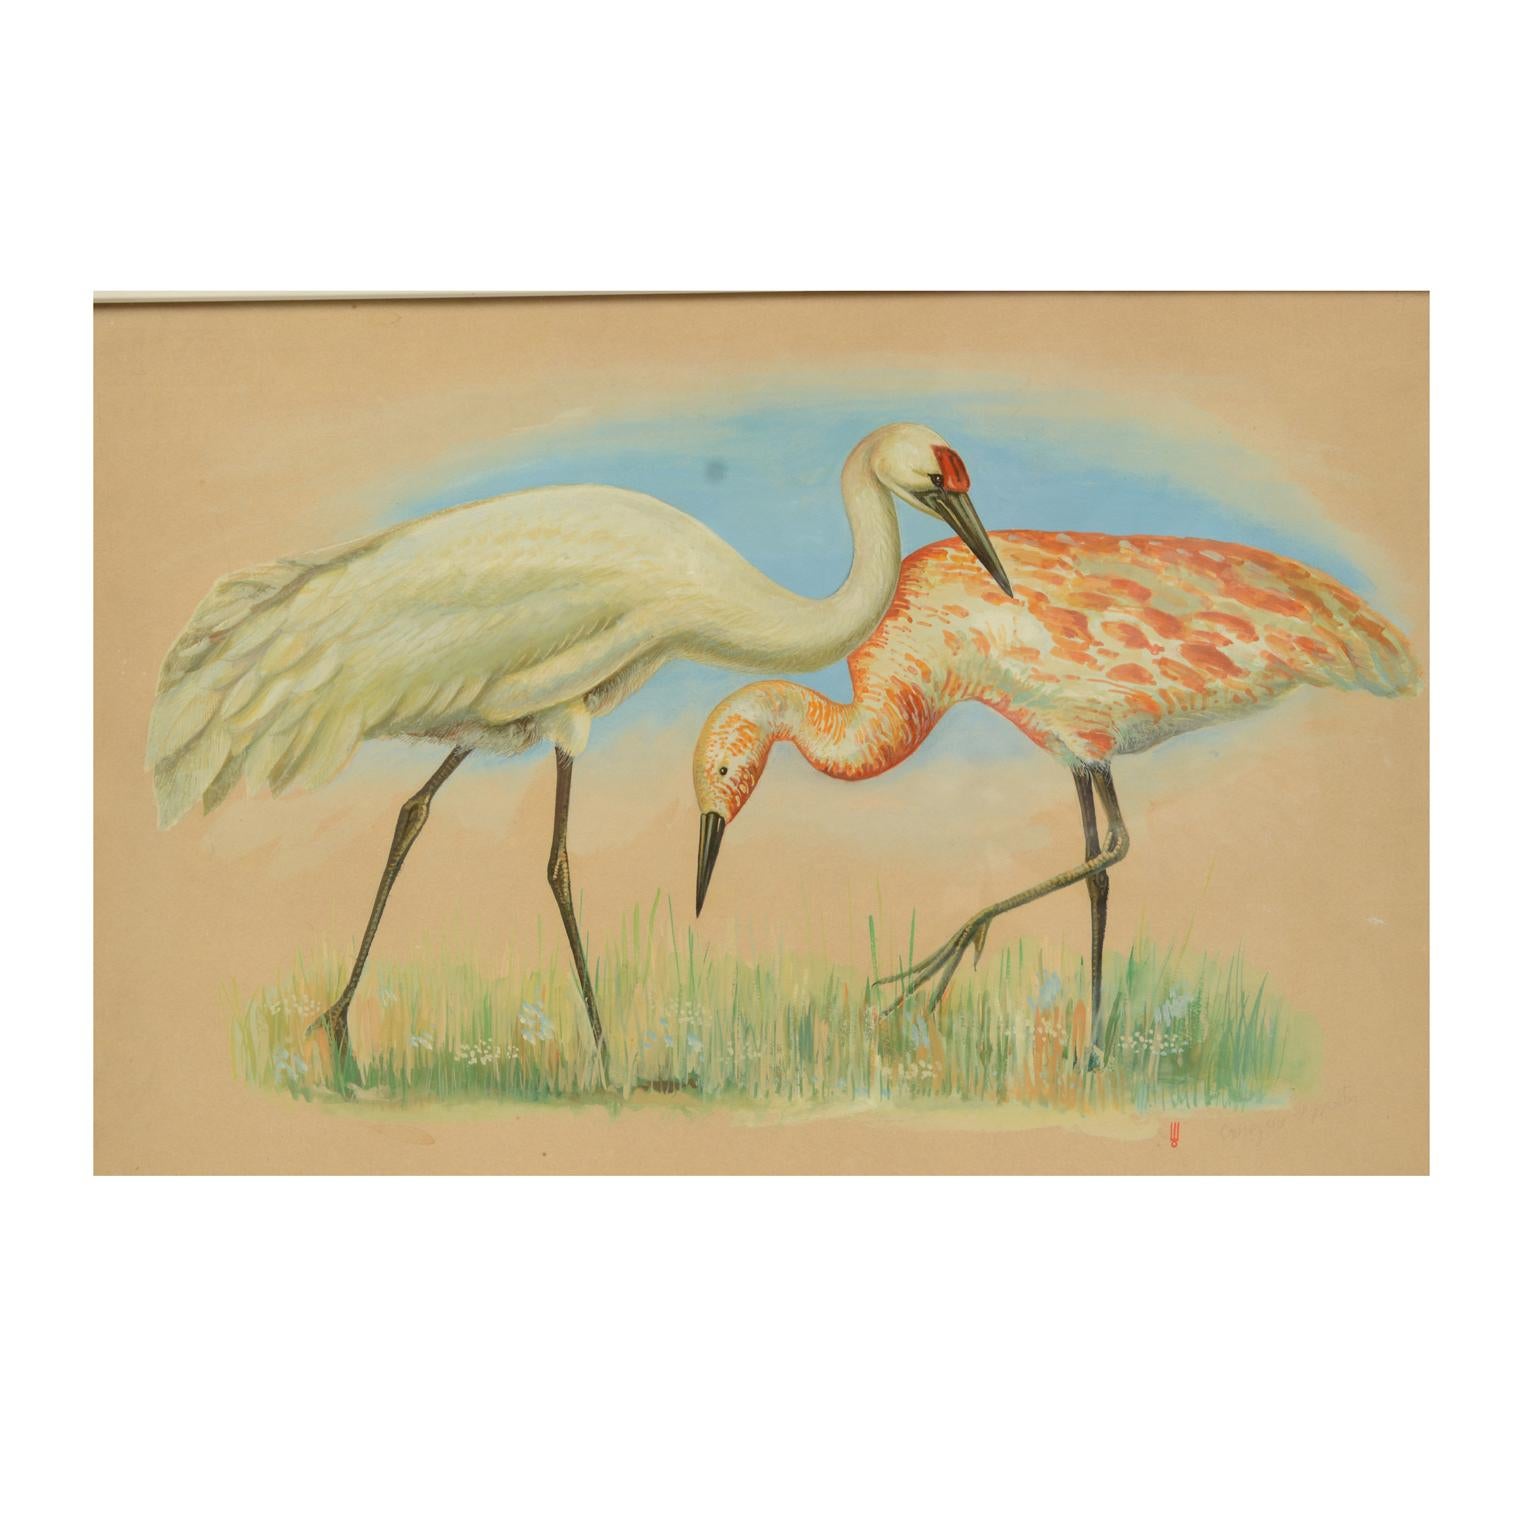 Acrylic colors on paper depicting two herons; it is a preparatory sketch commissioned for an animals encyclopedia for children, created and signed by a Korean artist in the 1970s. Very good condition. With frame 49.5 x 67 cm.
Shipping is insured by